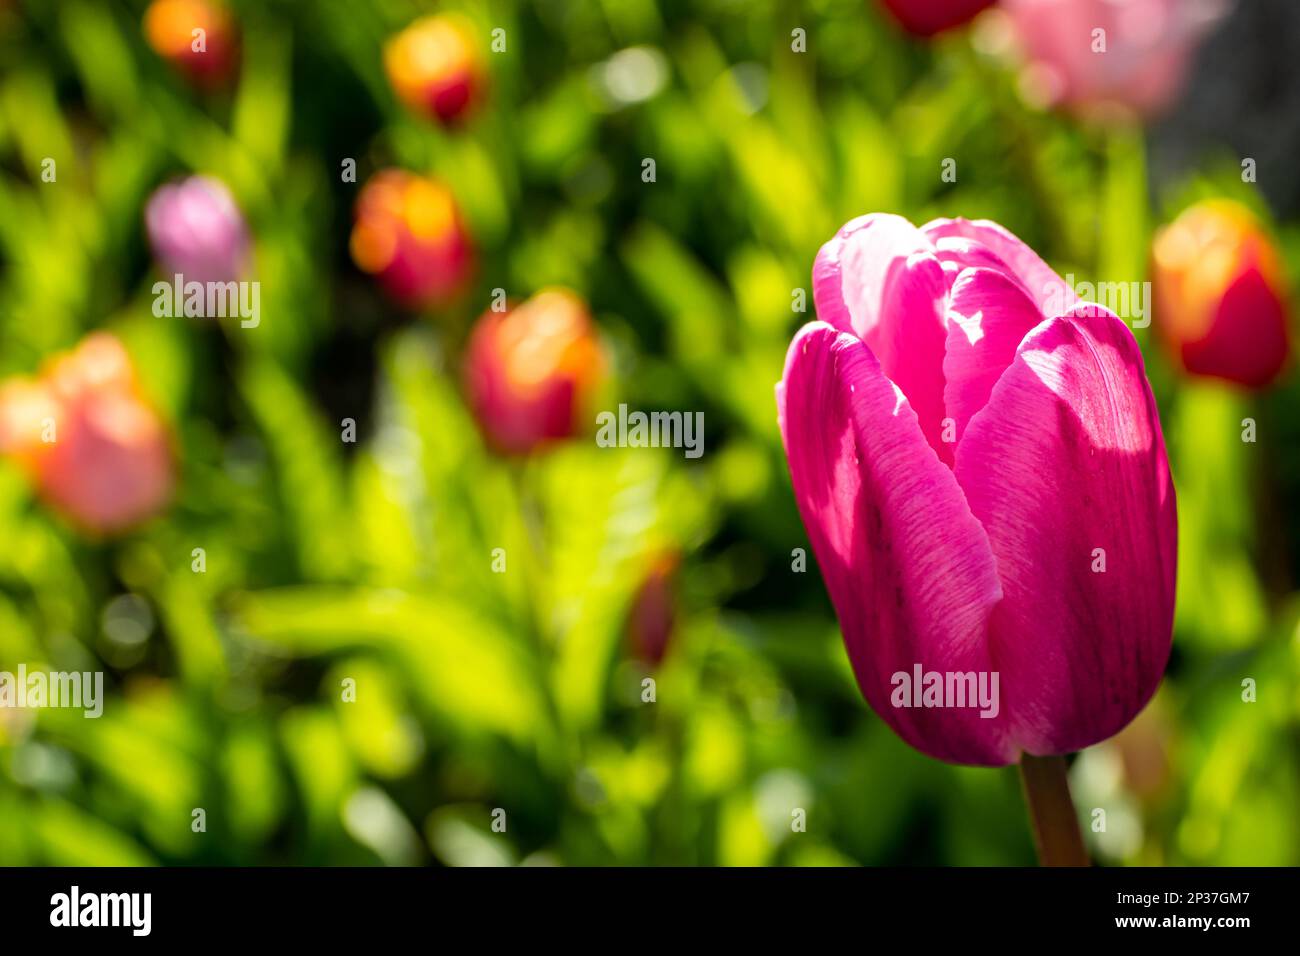 A pink tulip captures the attention on the right side, with a blurred floral bed in the background and copy space on the left, representing beauty. Stock Photo